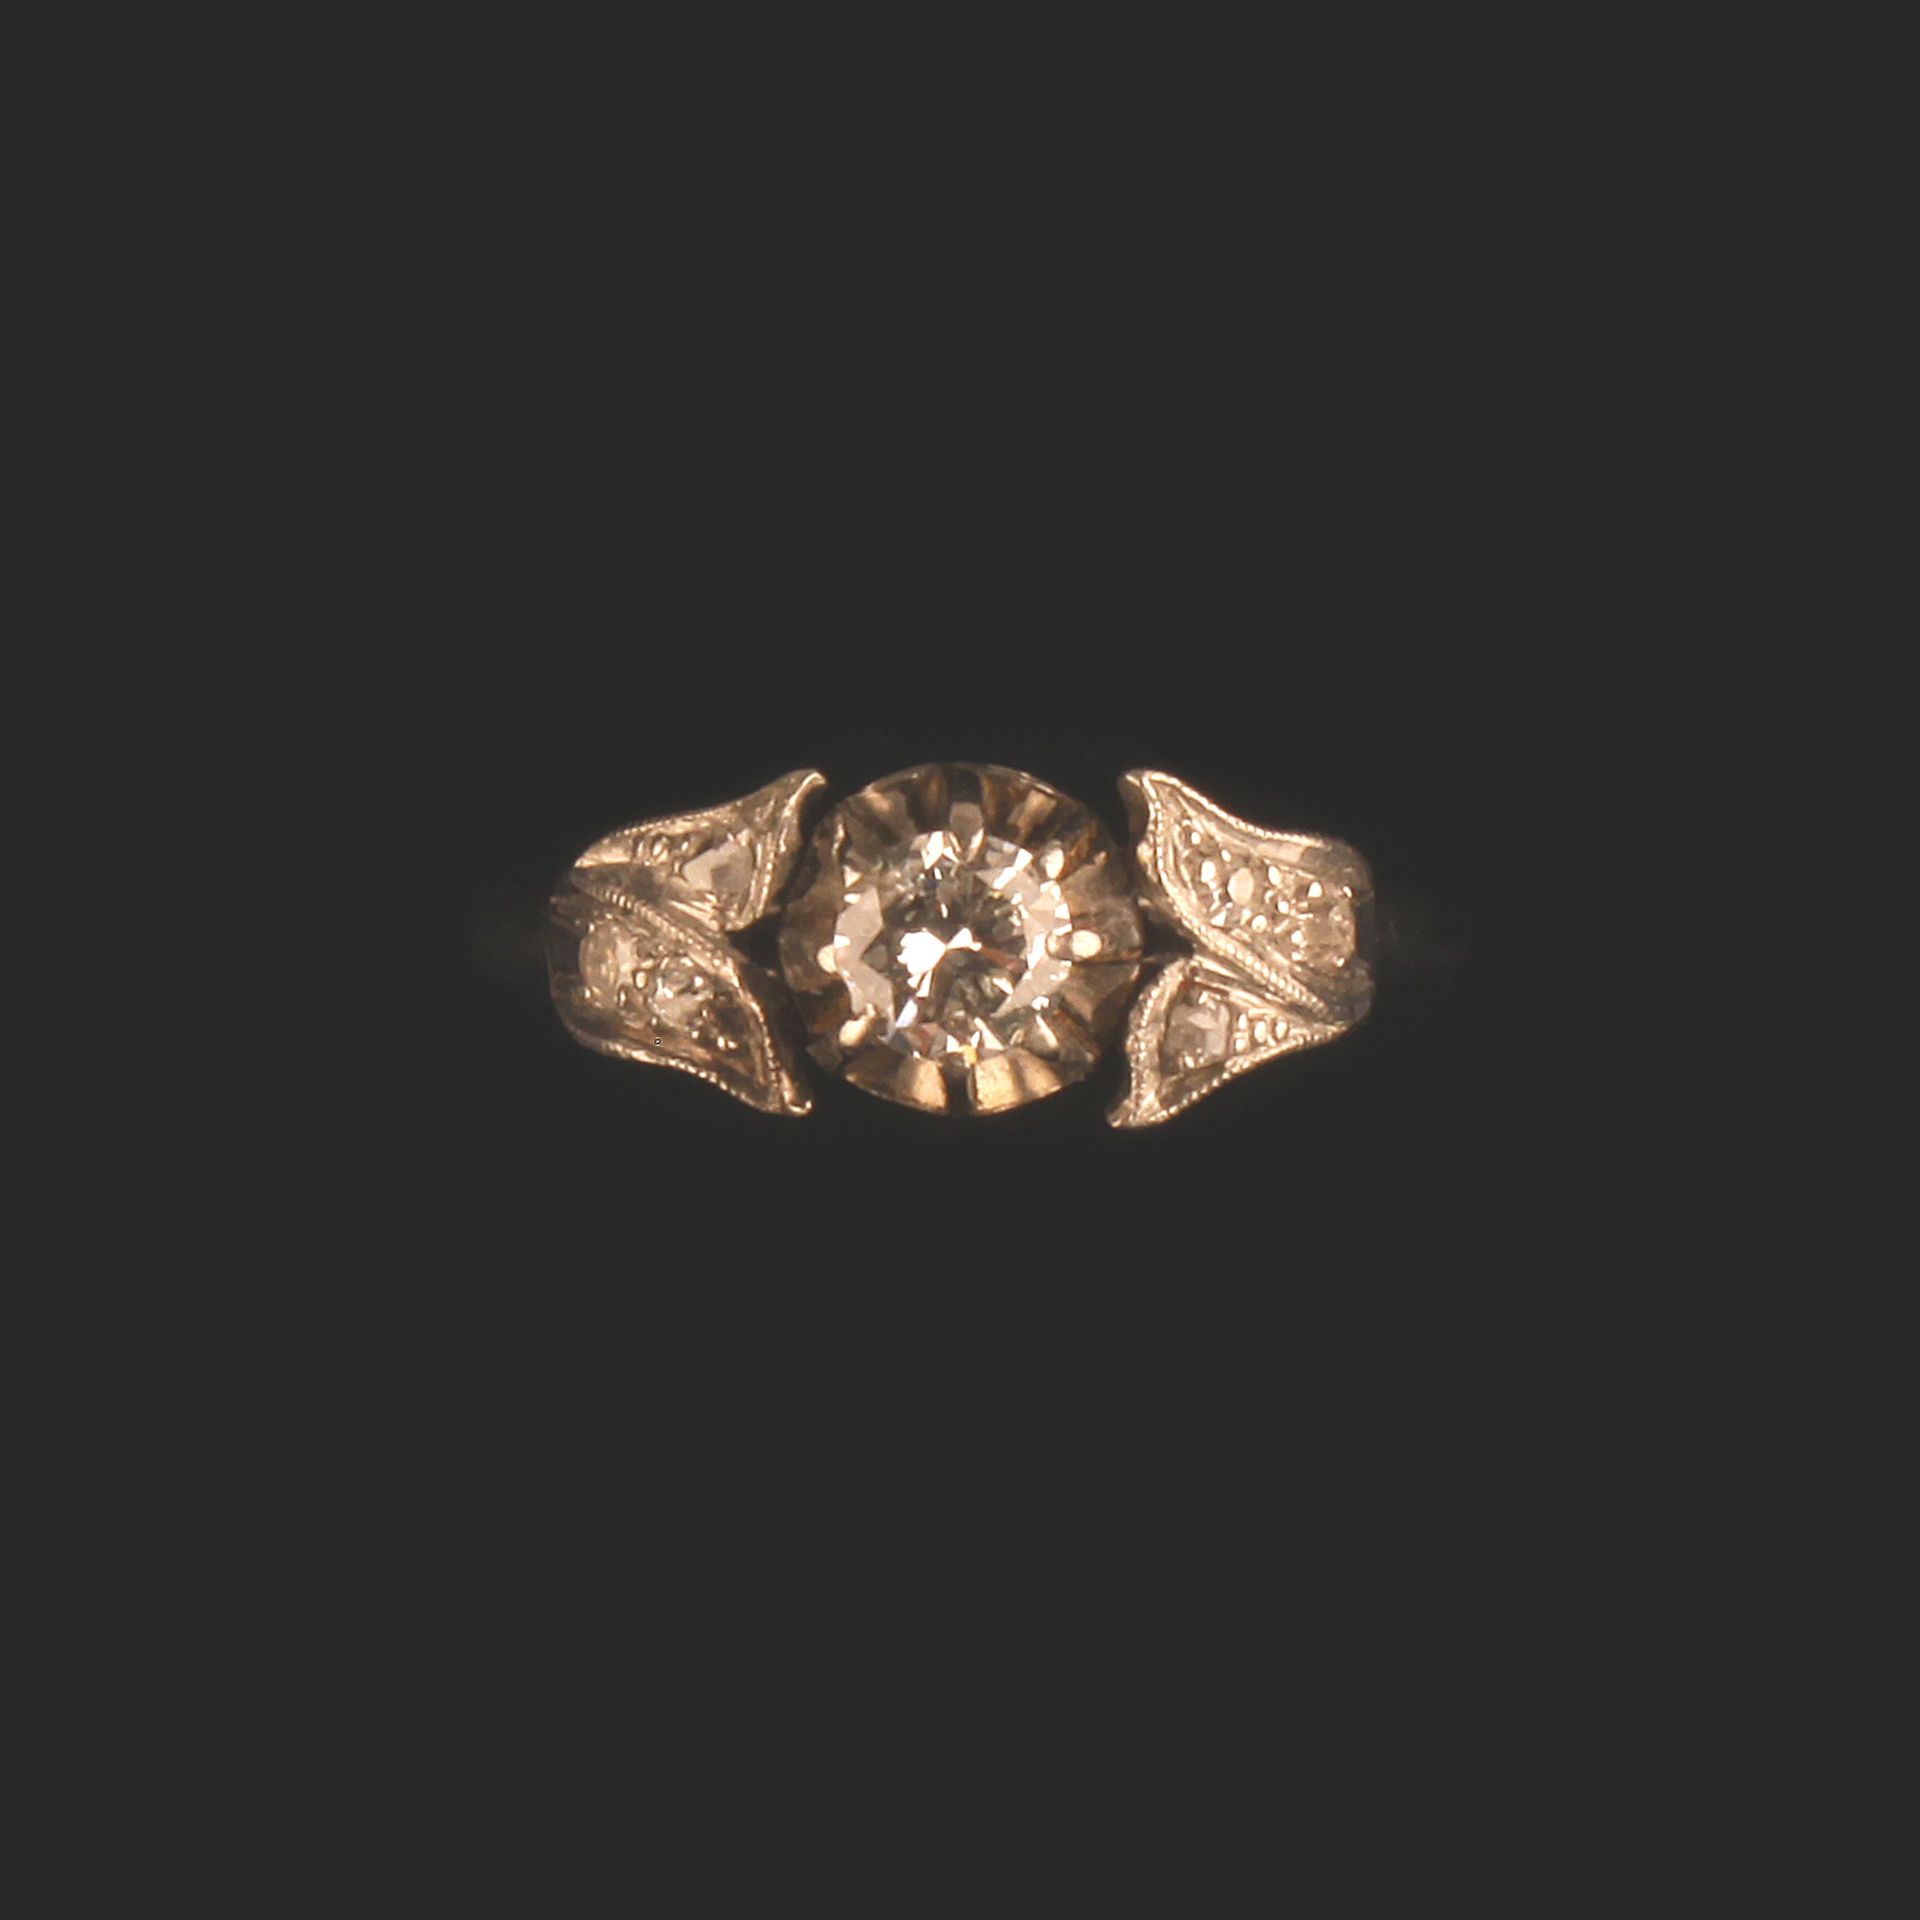 VINTAGE 18ct WHITE GOLD 0.50ct DIAMOND SOLITAIRE RING - Image 5 of 5